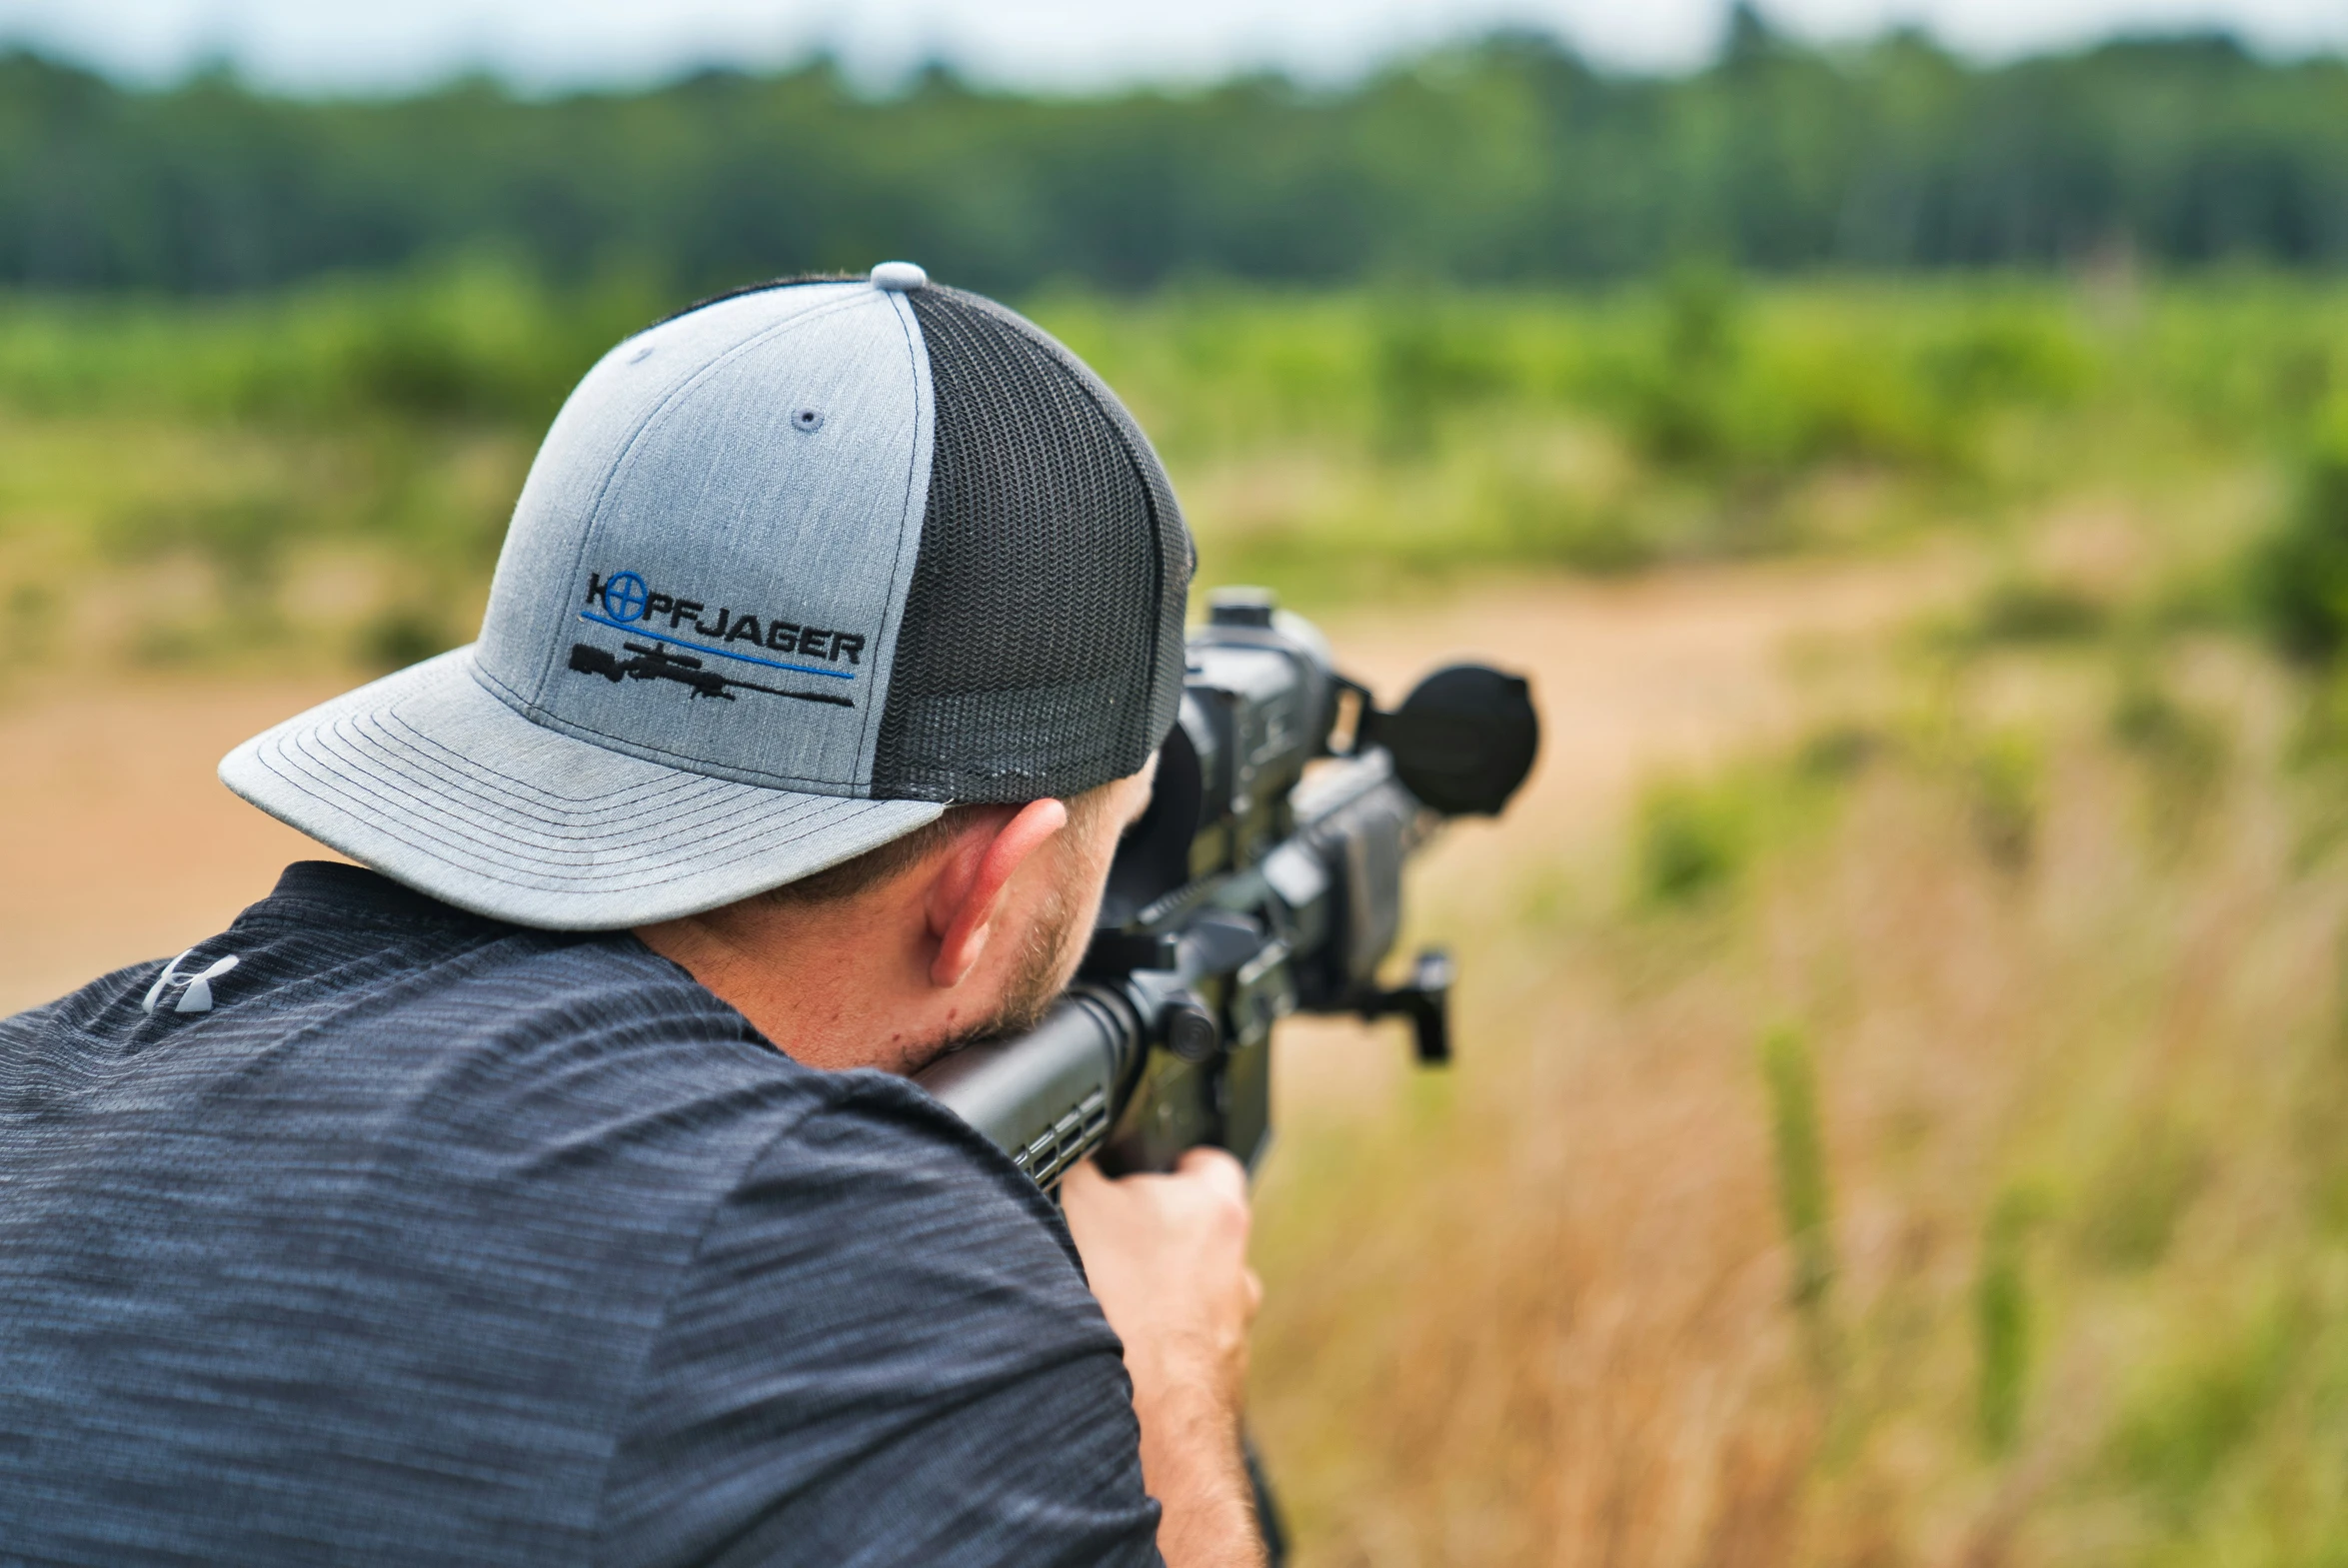 a man with a hat is taking aim in a field